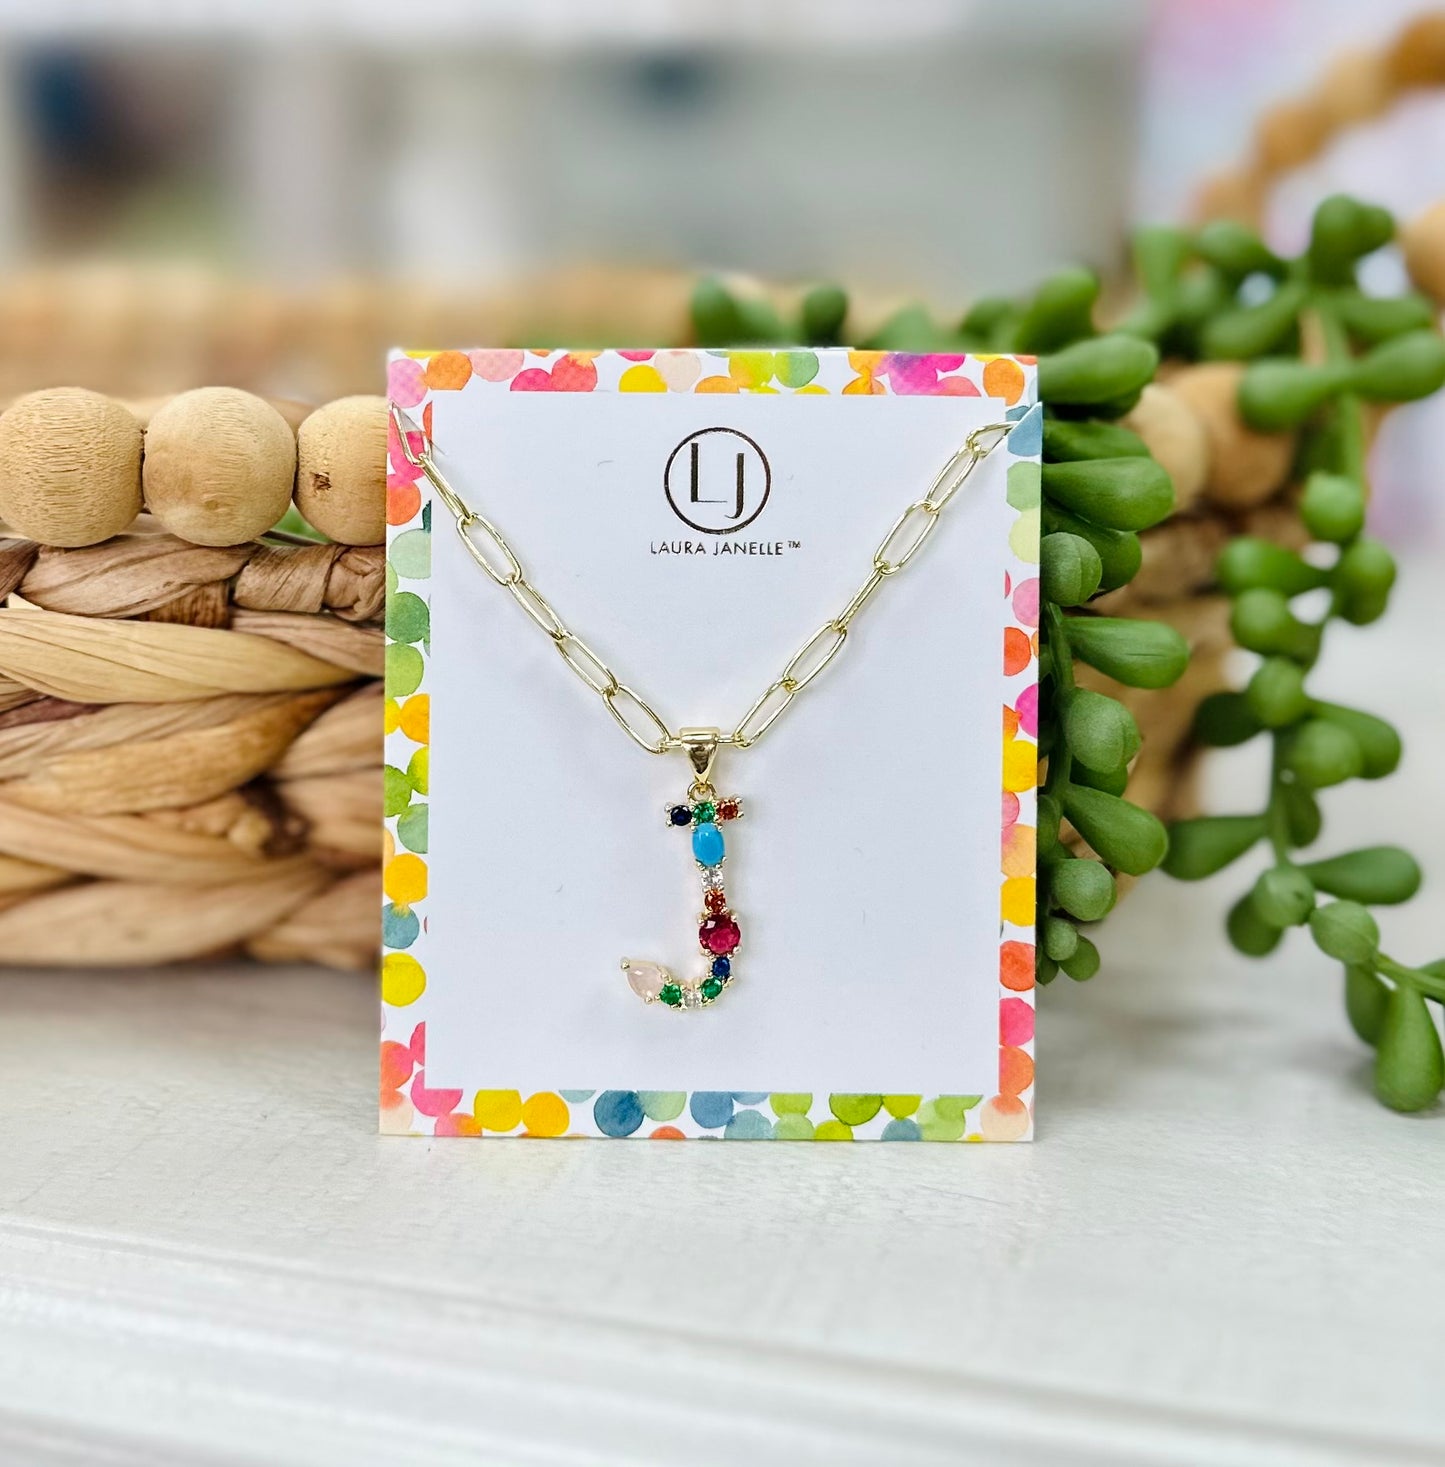 Laura Janelle Initial Necklace